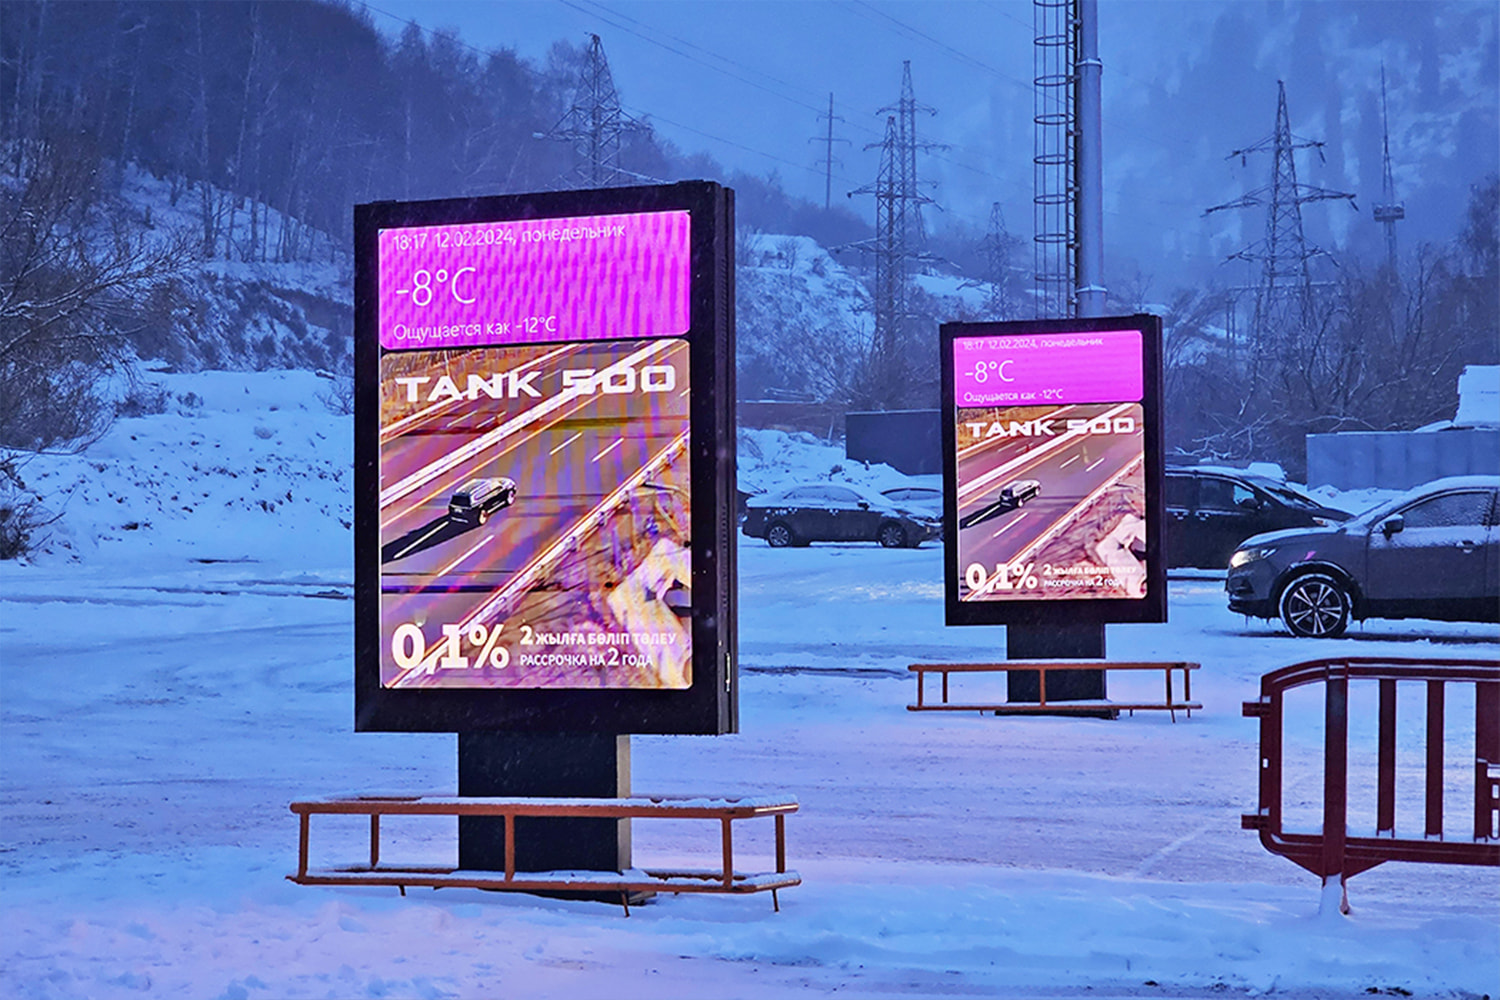 Let’s reveal to you why our LED Billboard can operate stably even in extremely cold weather